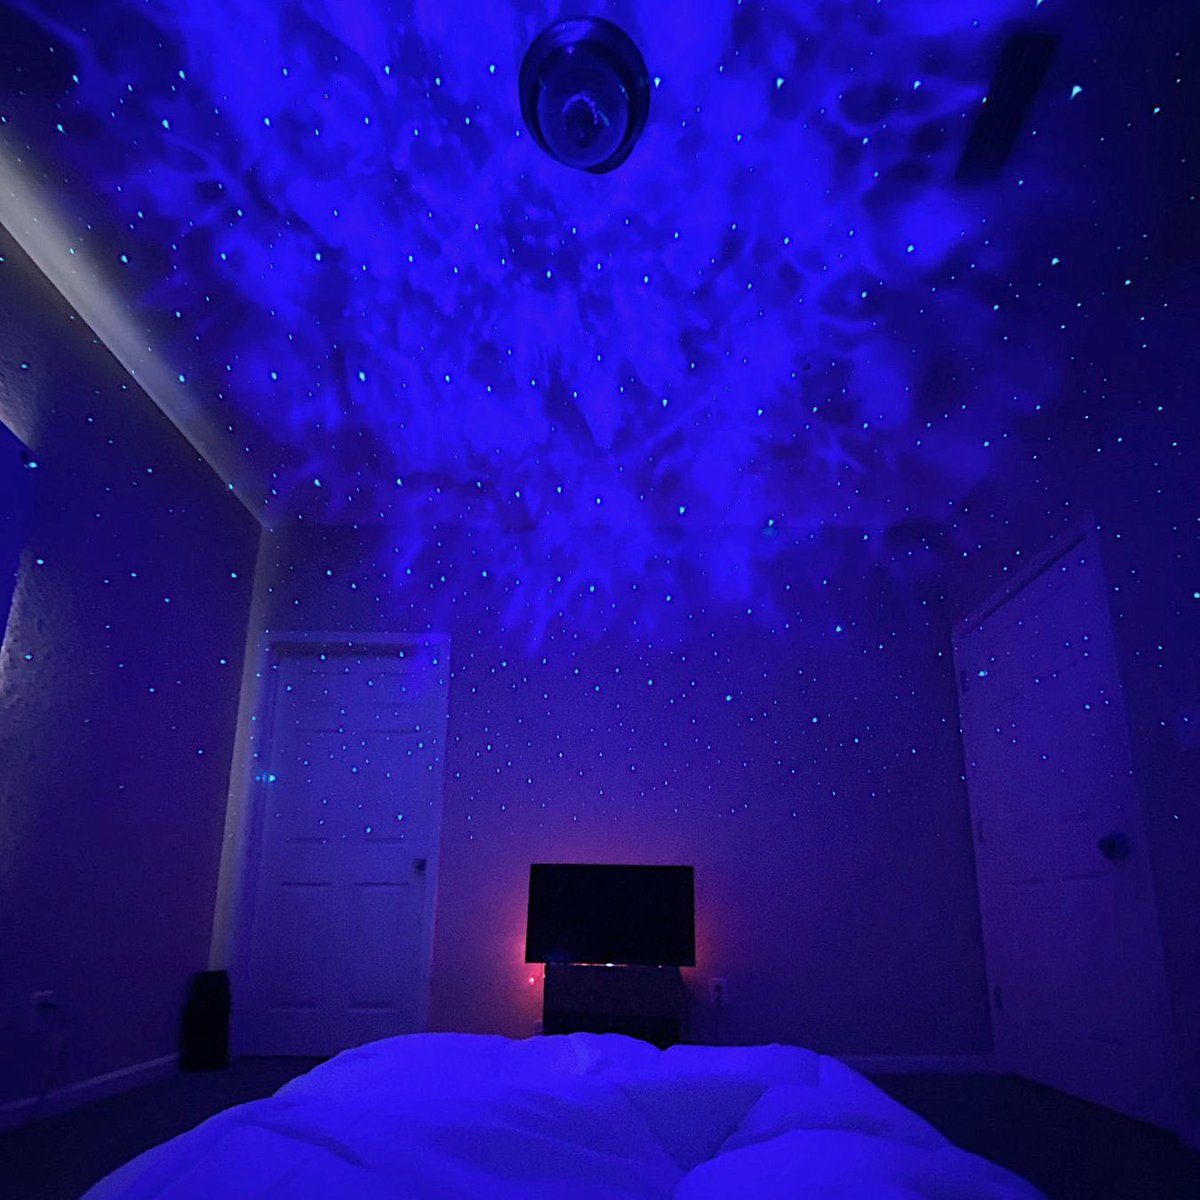 And while you’re all here please check out these fabulous ocean galaxy light projectors, they’re so pretty  https://oceangalaxylight.shop/products/light 